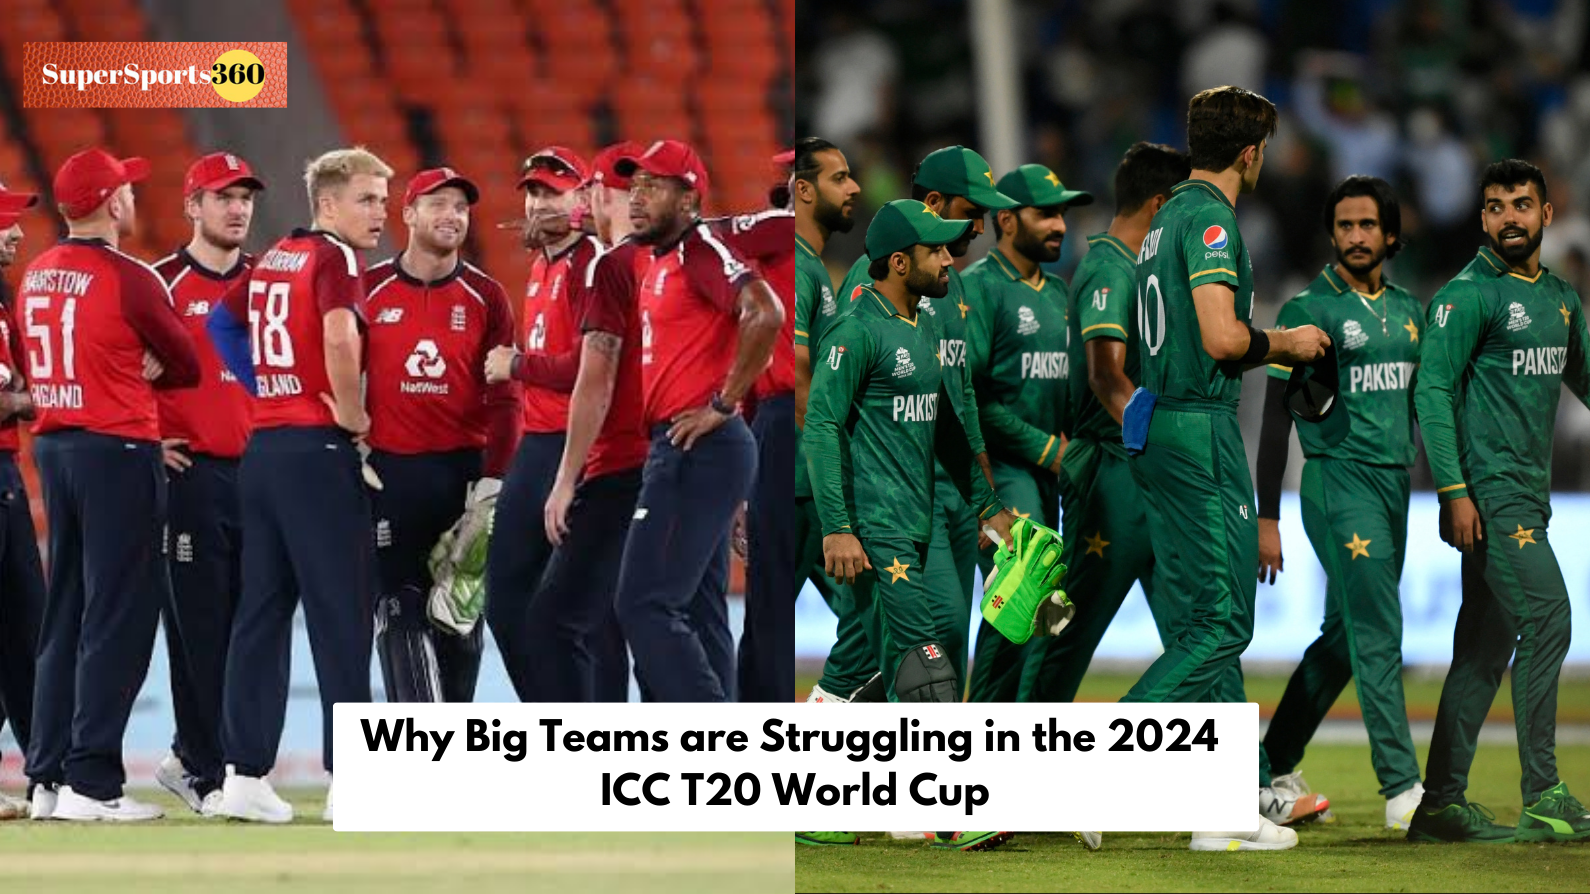 Why Big Teams are Struggling in the 2024 ICC T20 World Cup